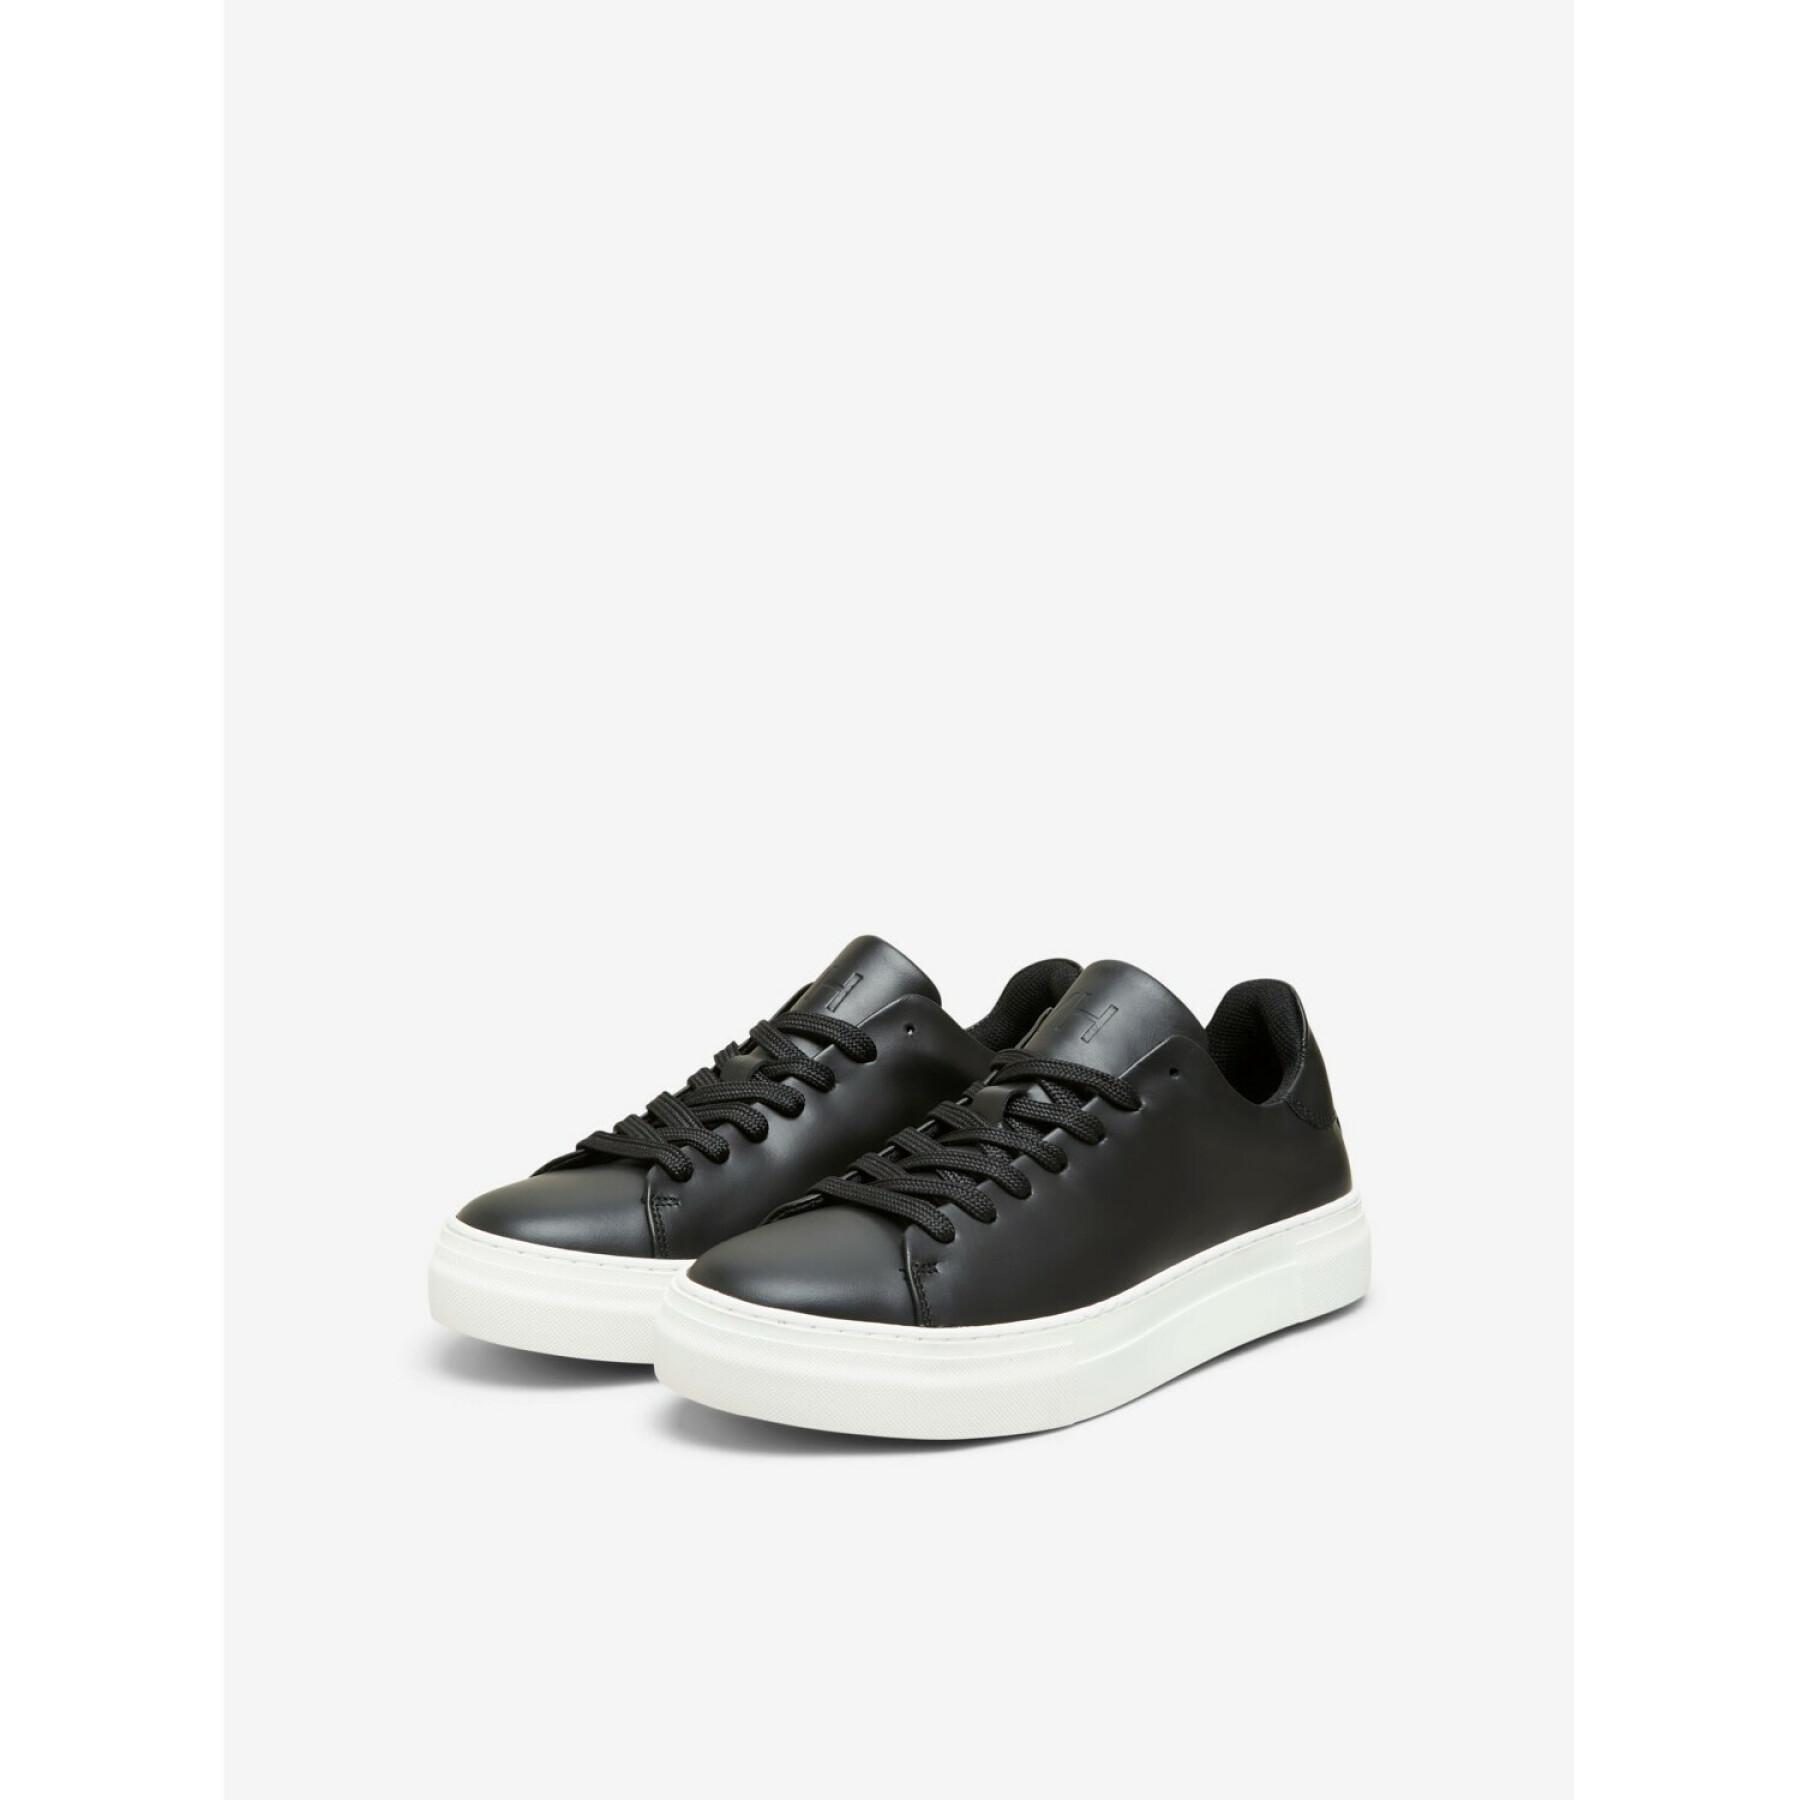 Chaussures Selected David chunky leather trainer